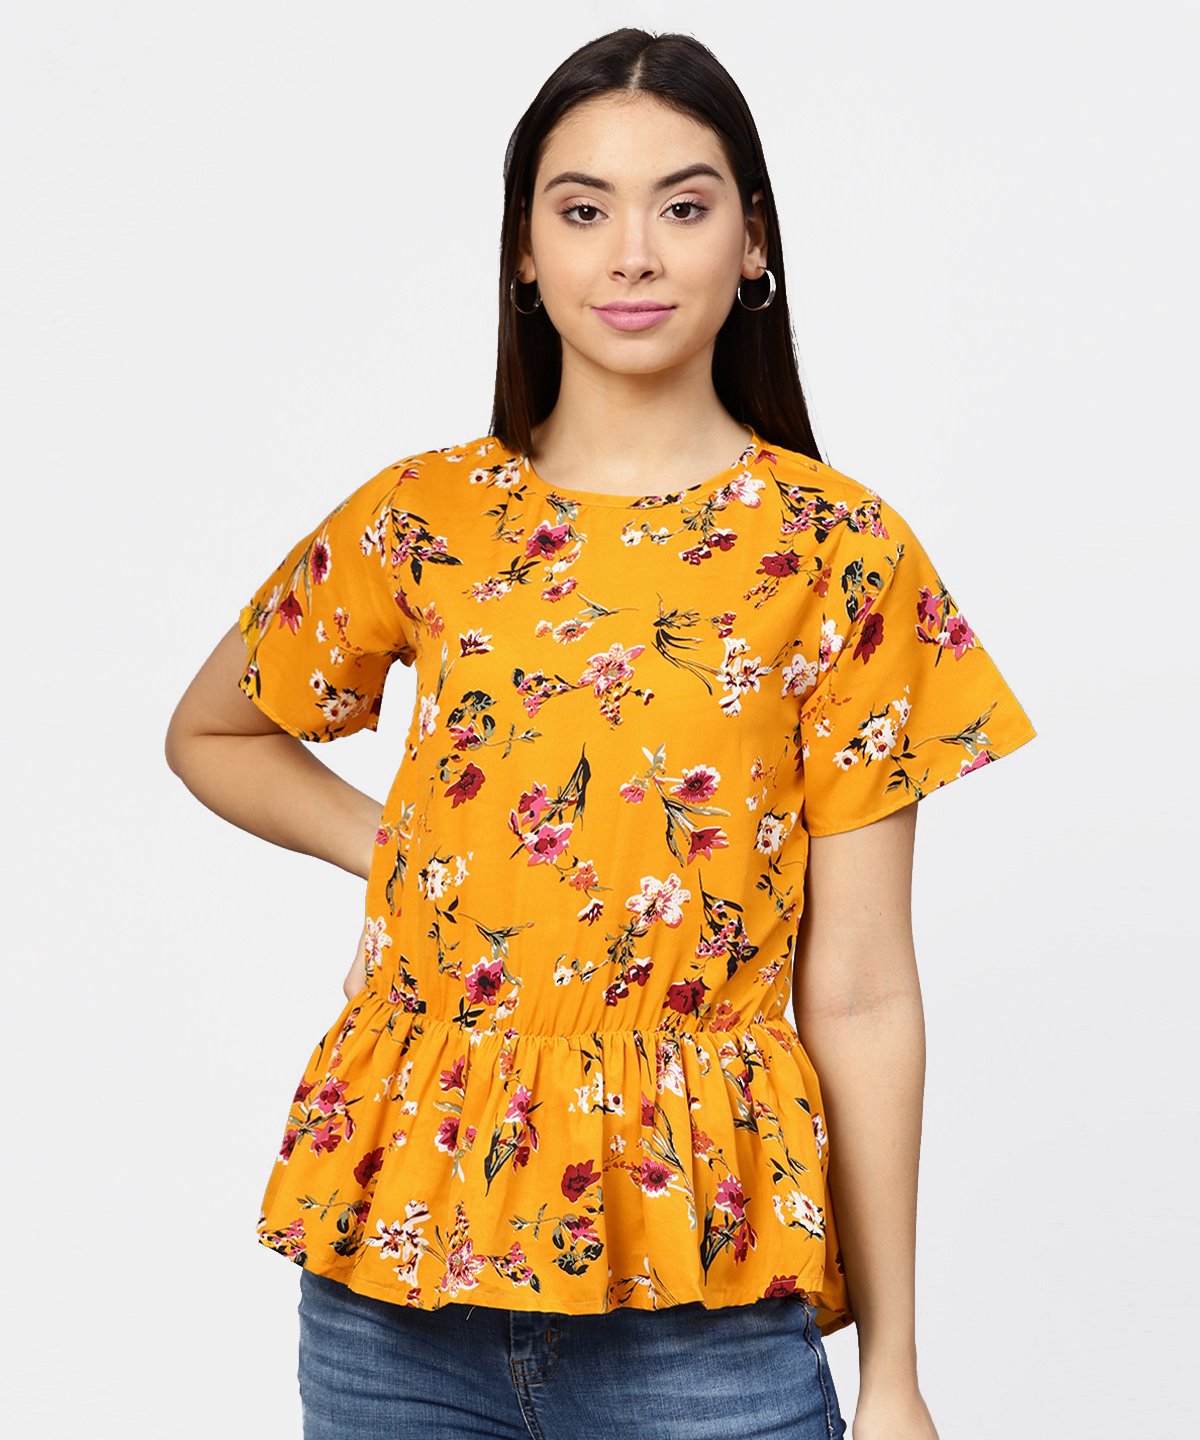 Women's Yellow Printed Short Sleeve With A Gathered Peplum Style Top - Nayo Clothing